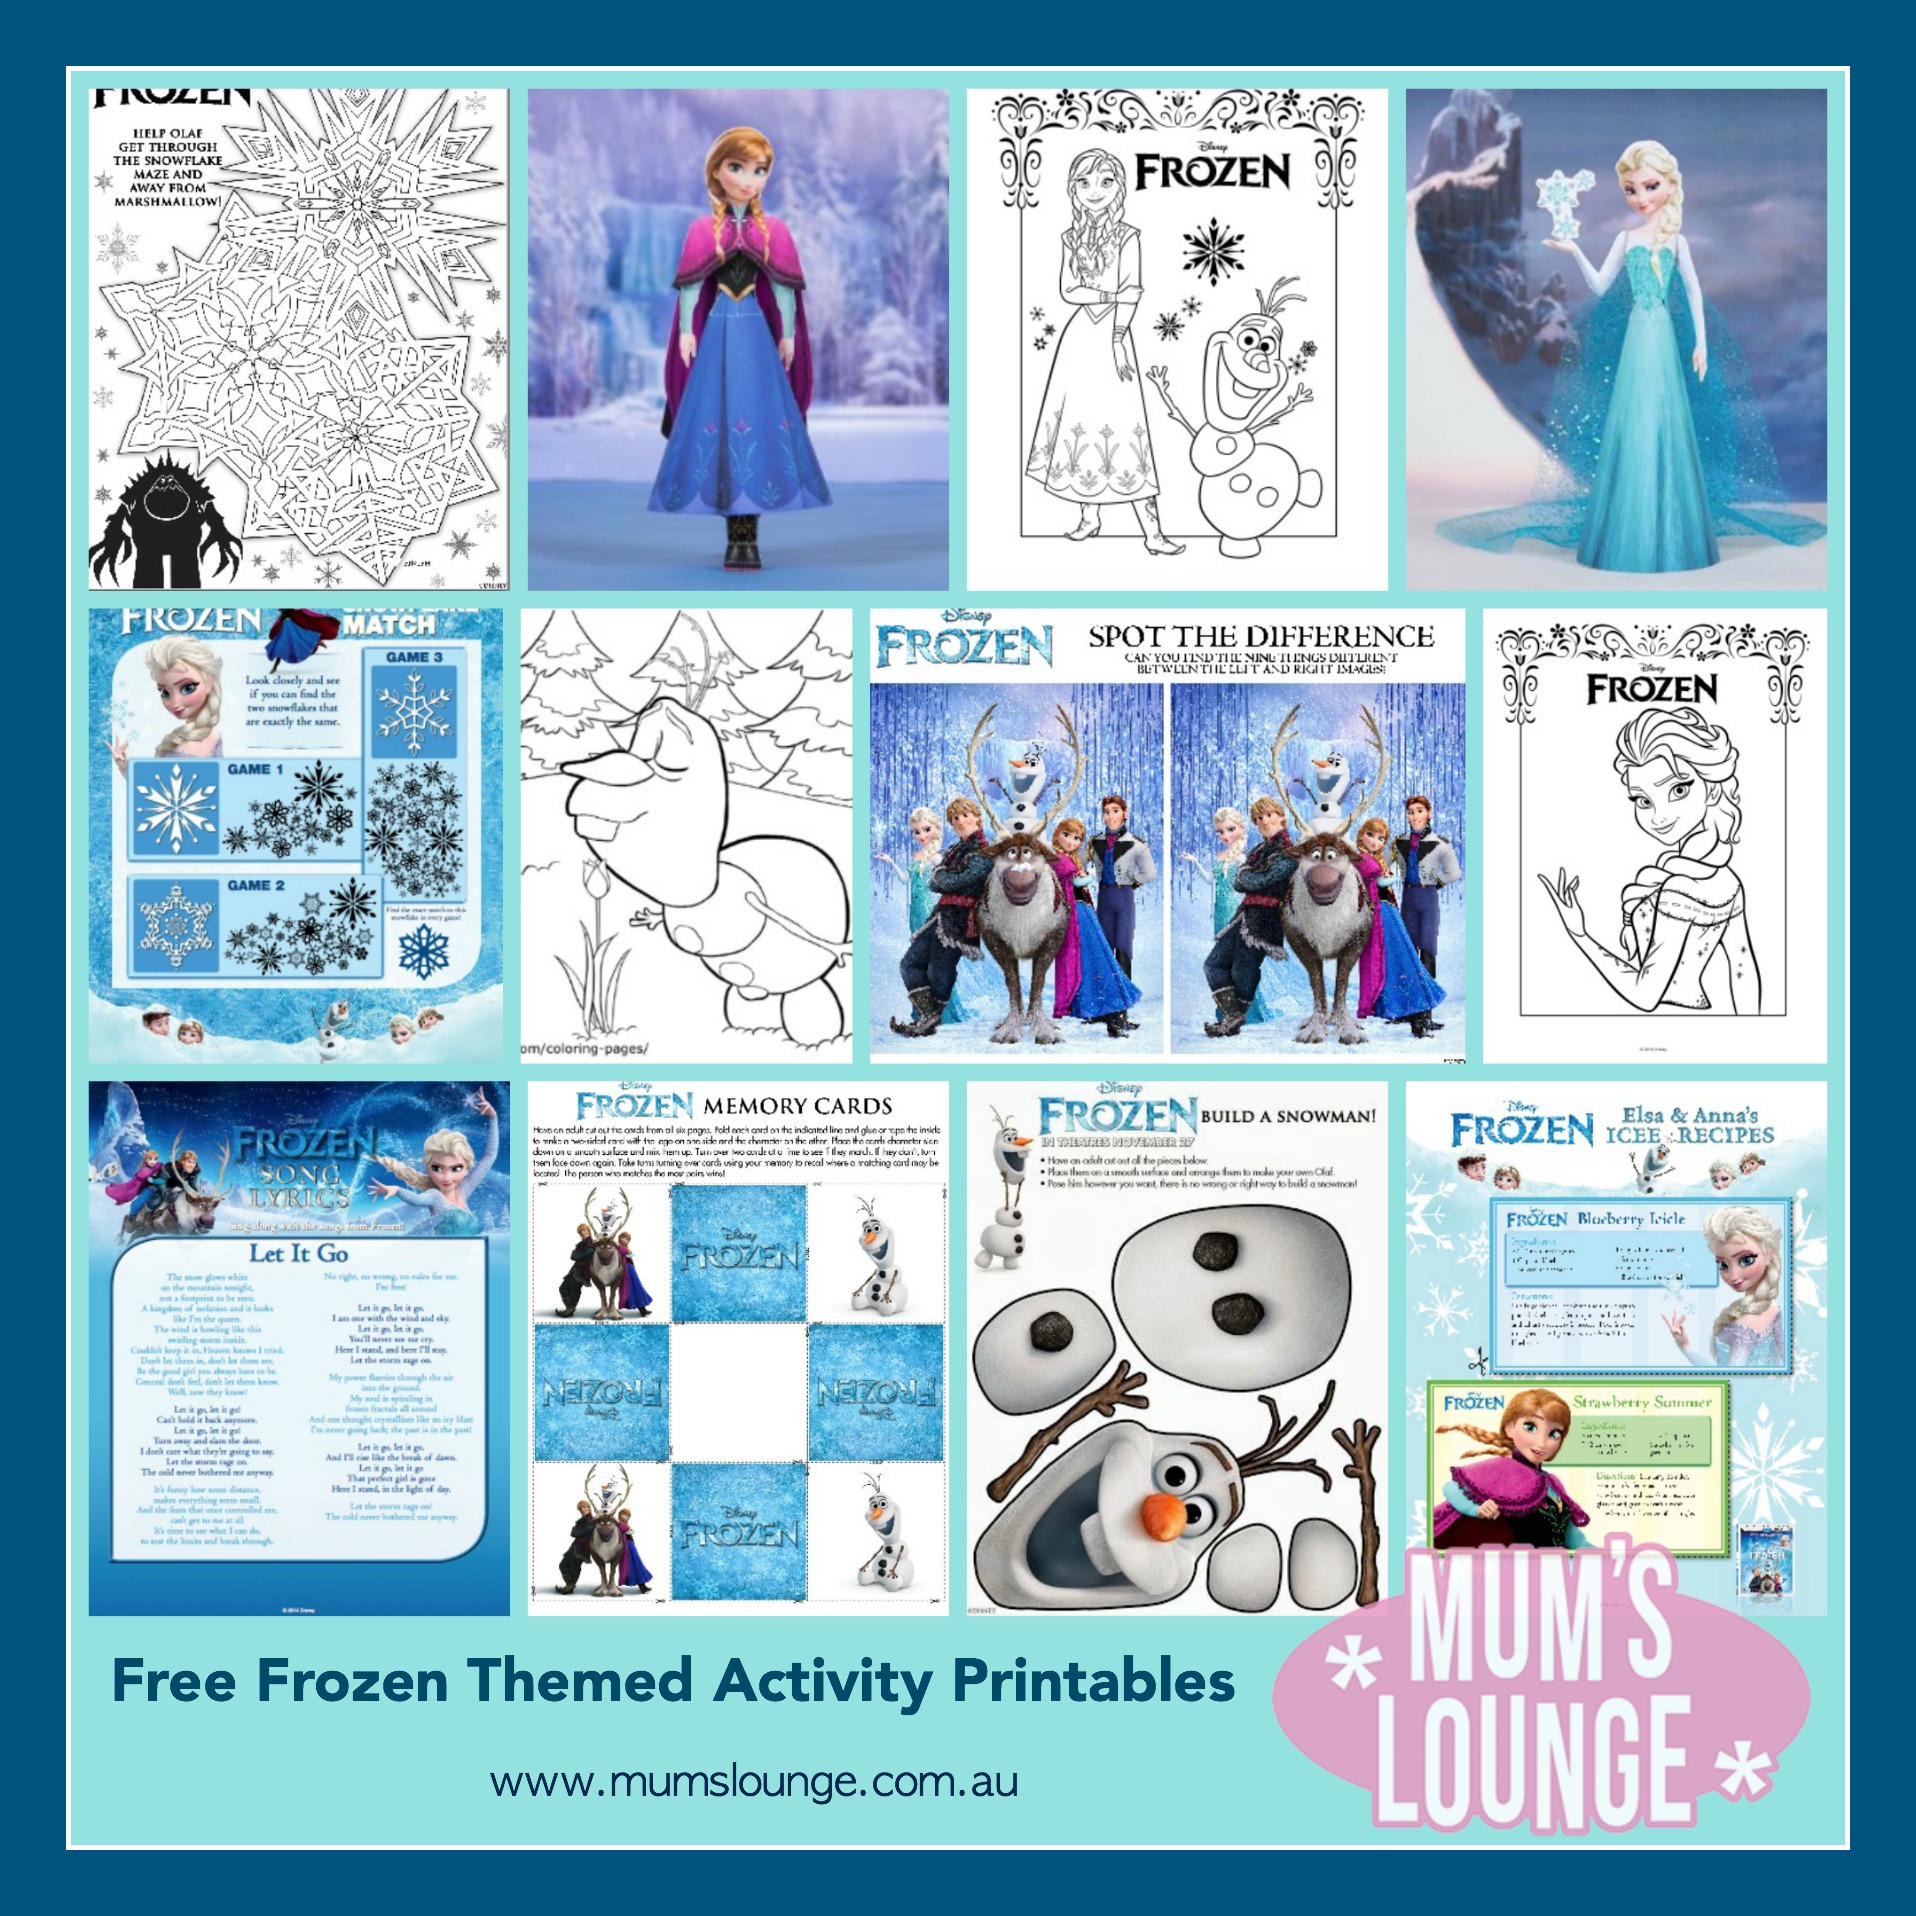 Save Your Sanity These School Holiday with These Free Frozen Activity